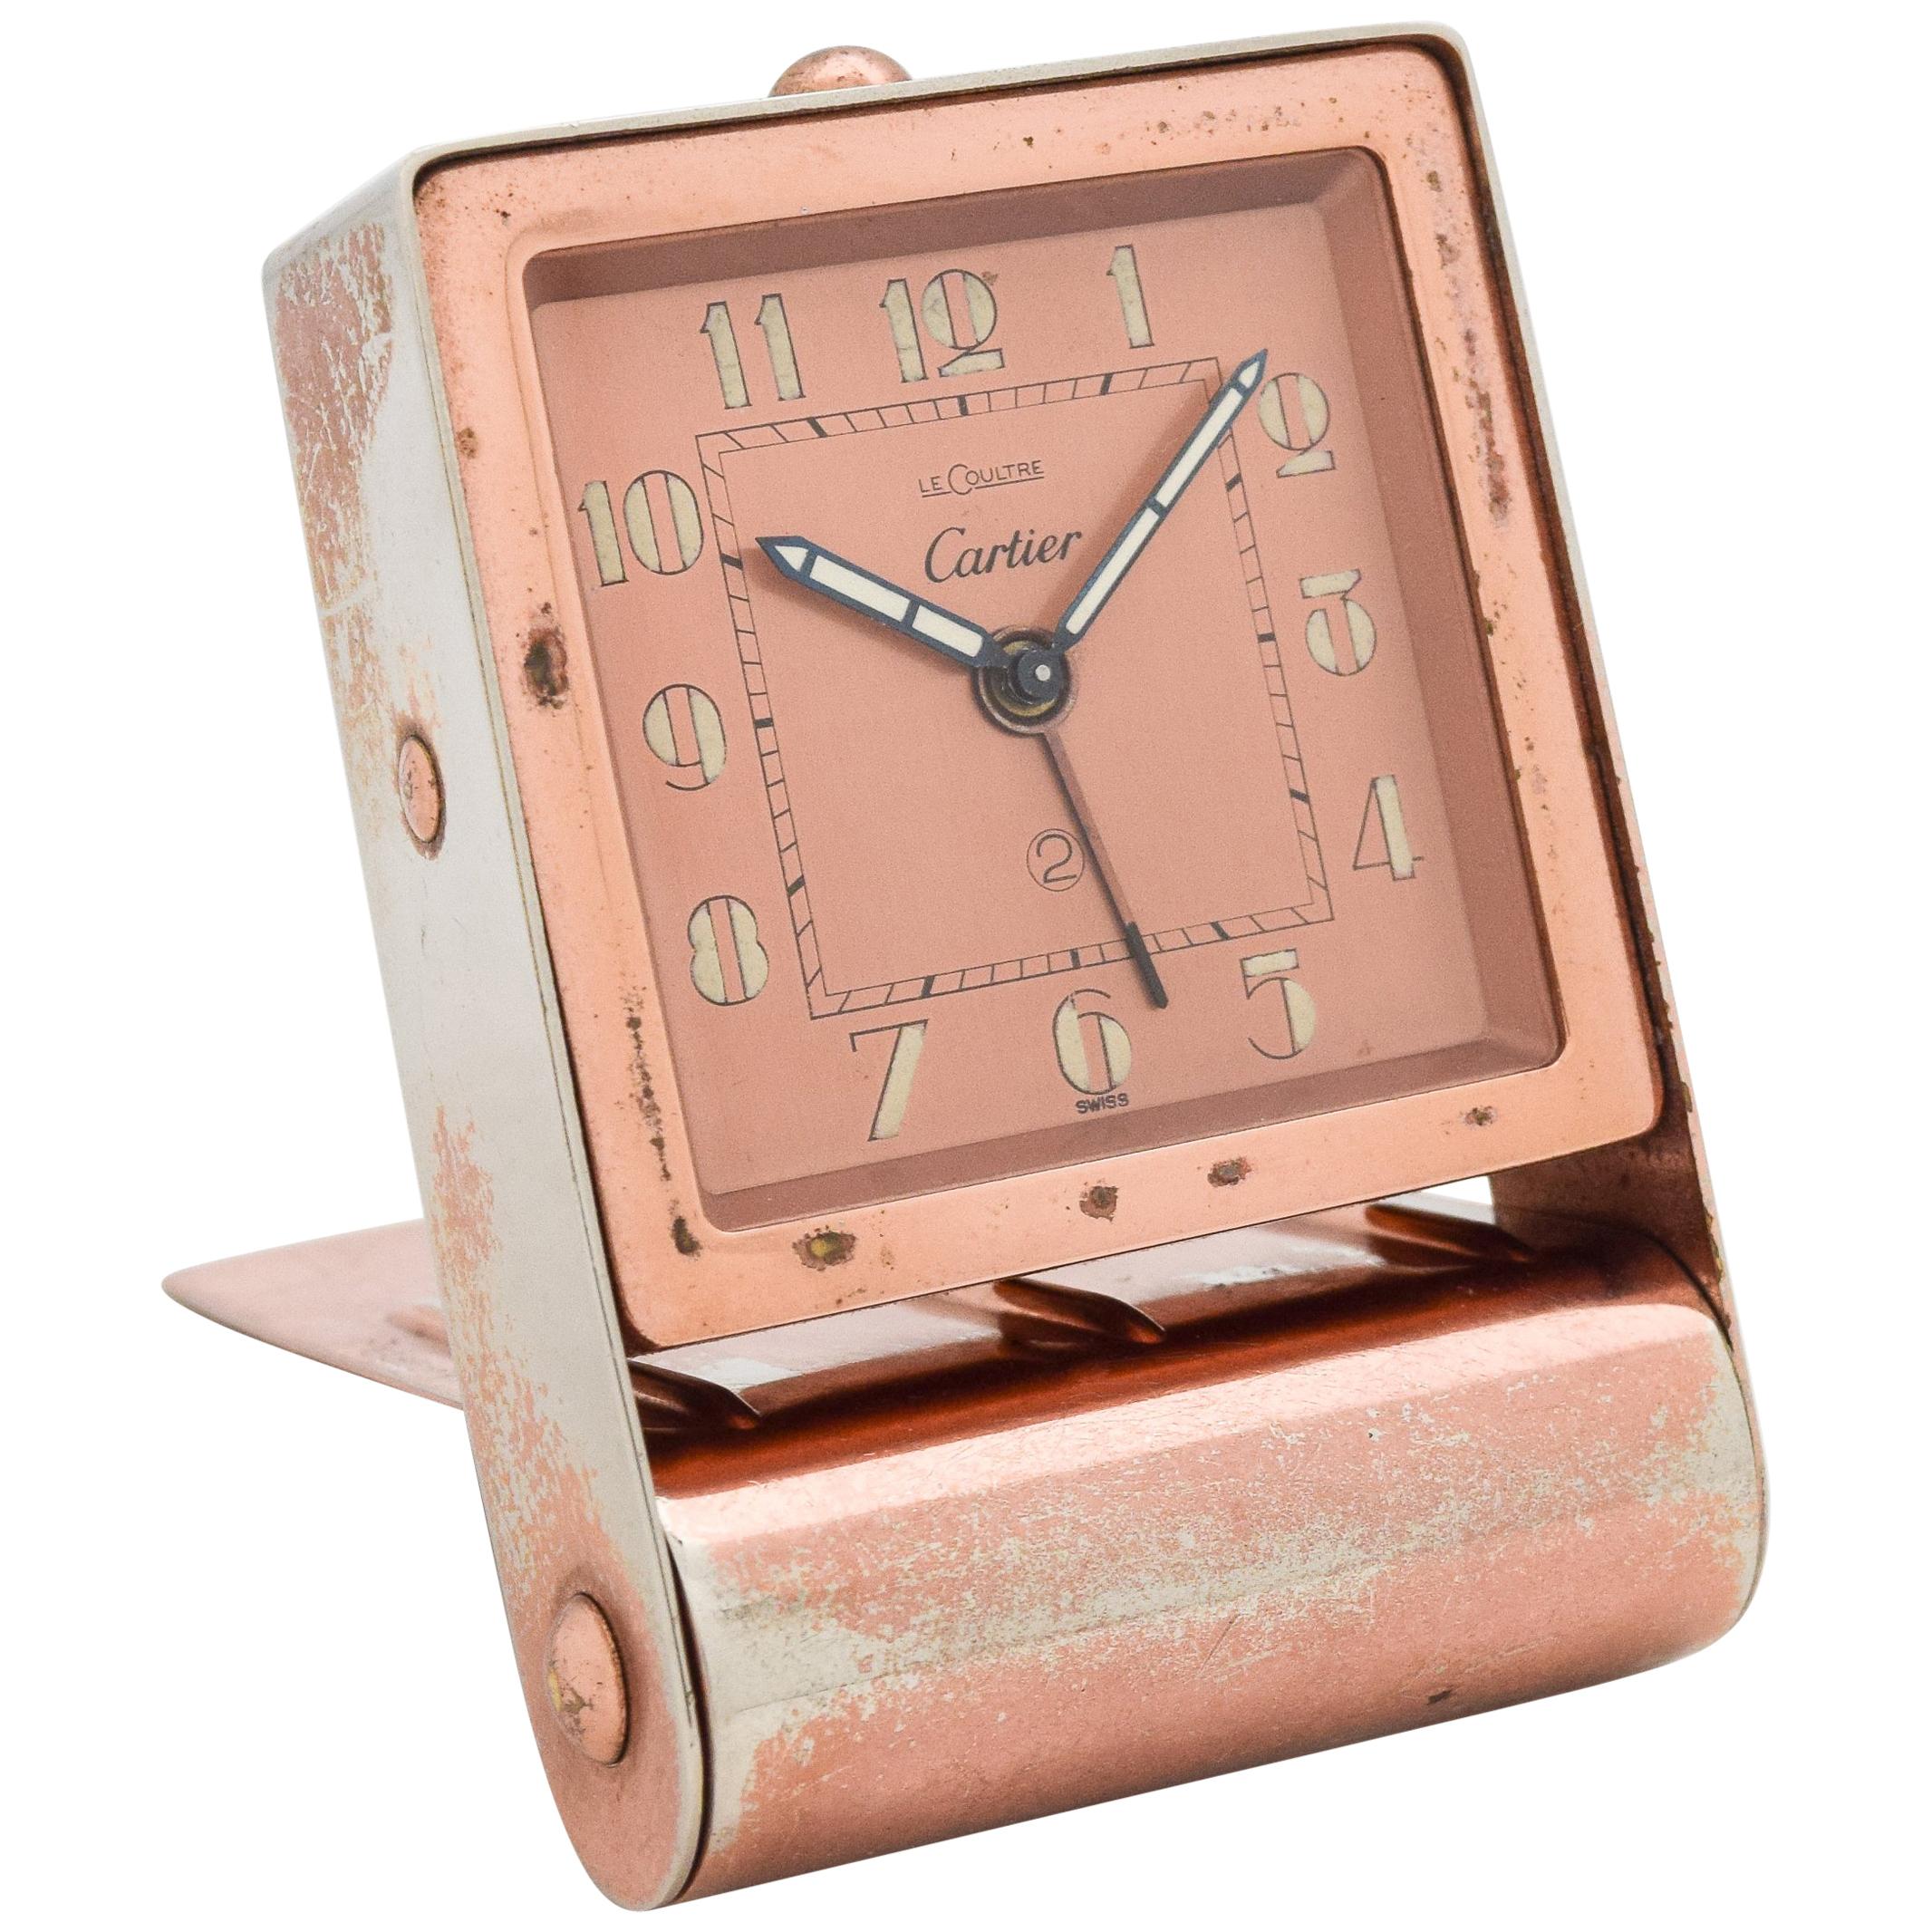 Vintage Cartier Travel Clock with a Jaeger LeCoultre Movement, 1940s For Sale